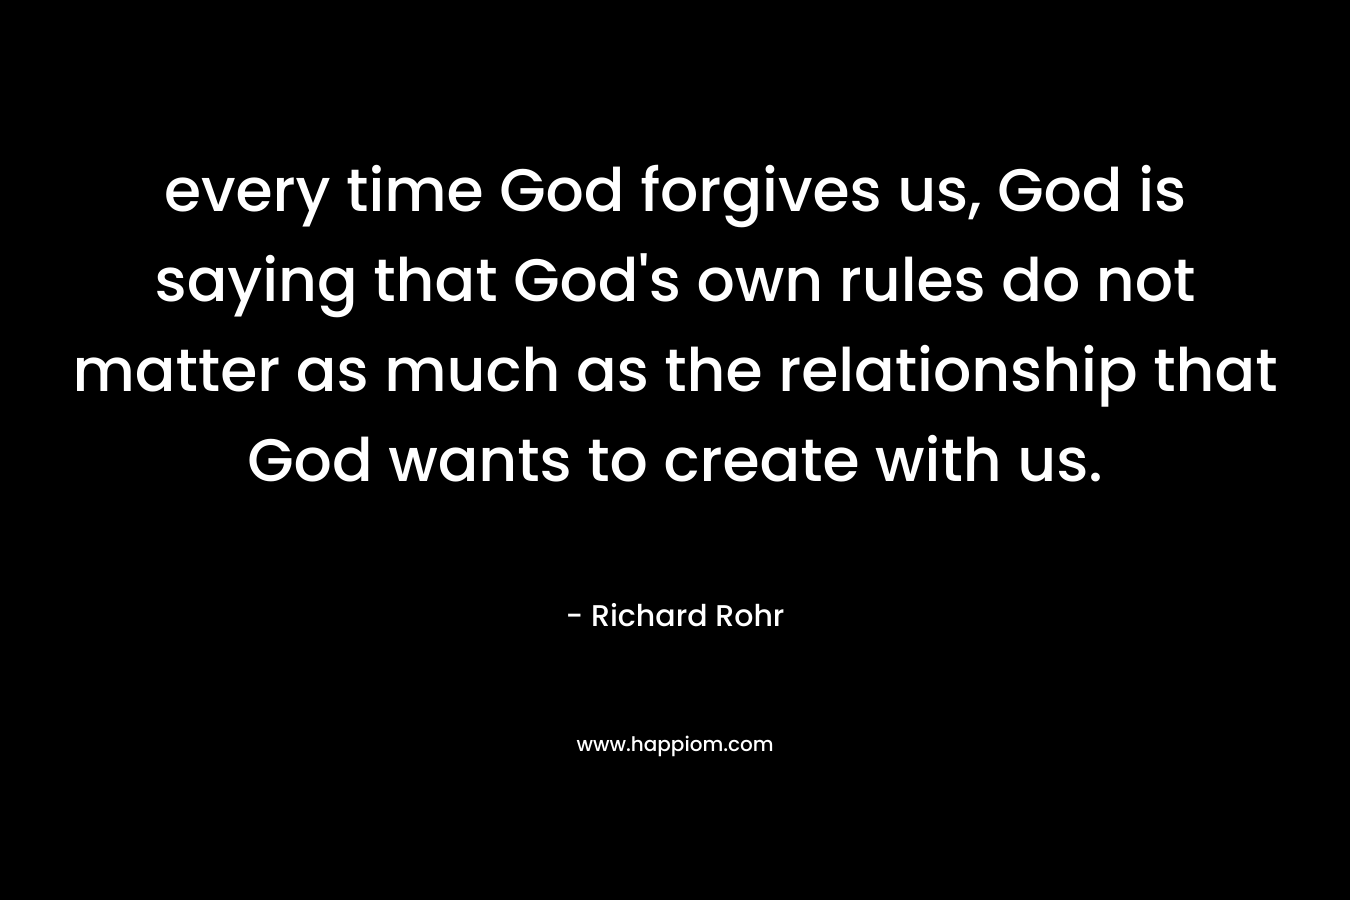 every time God forgives us, God is saying that God's own rules do not matter as much as the relationship that God wants to create with us.